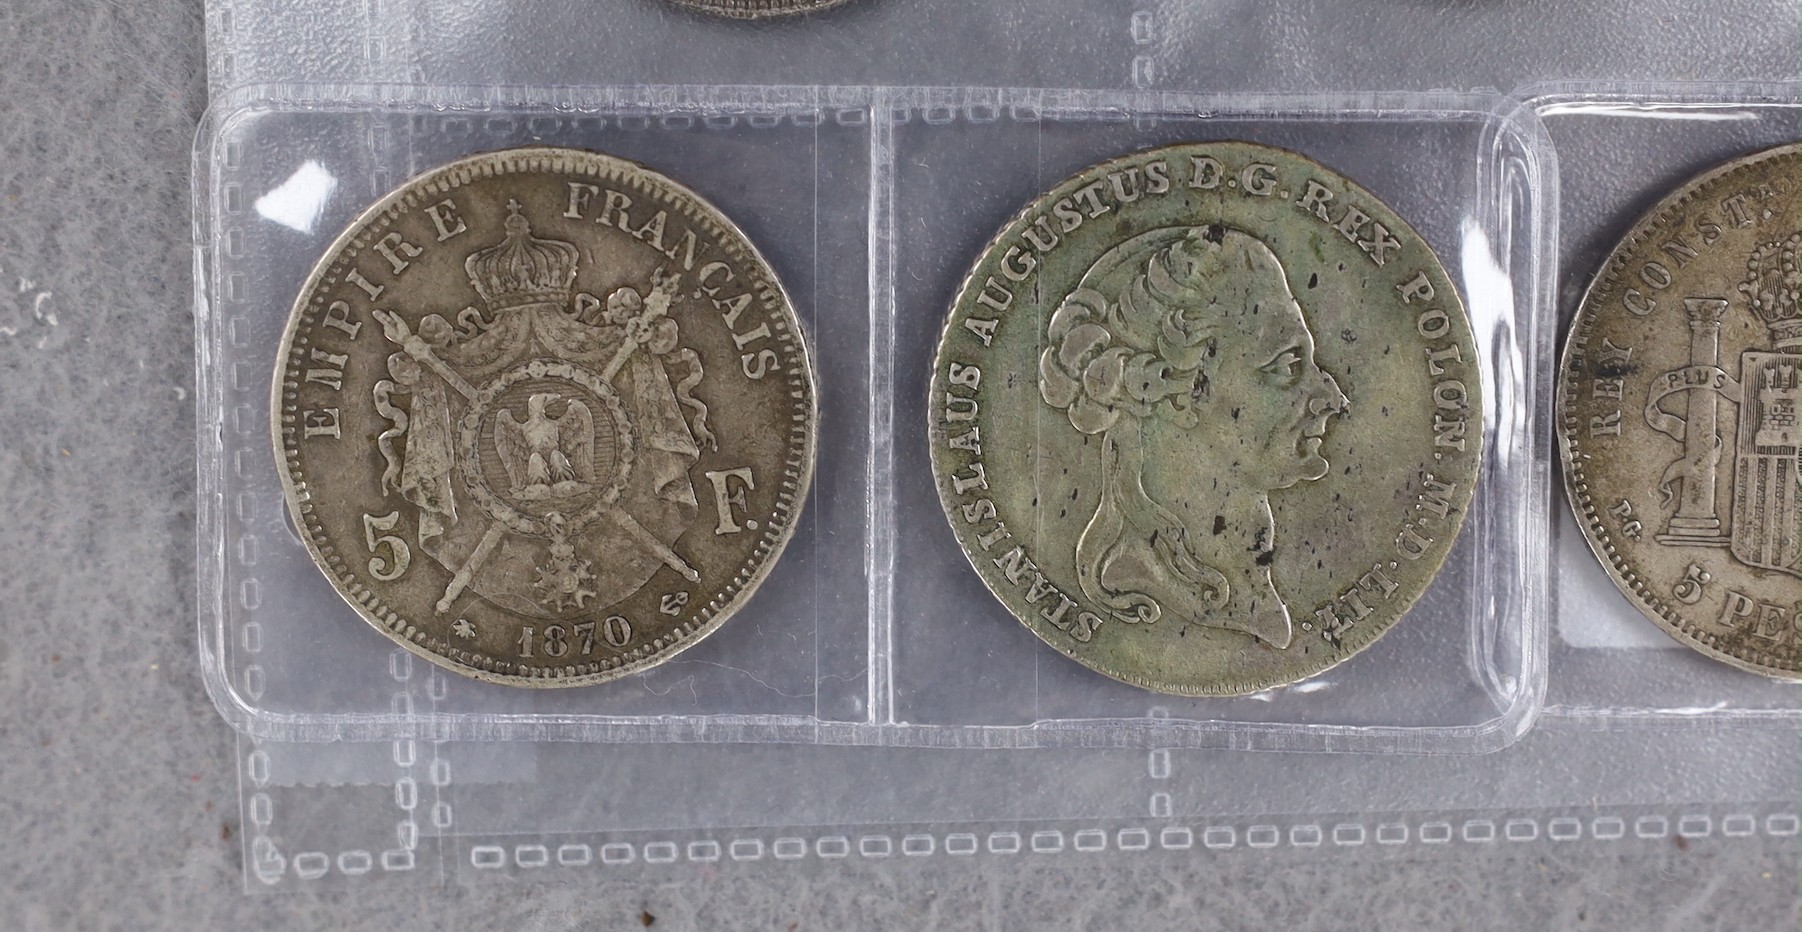 U.S.A. coins, five Morgan dollars 1878, 1888, 1891, 1895 and 1921, three other dollars 1924, 1925